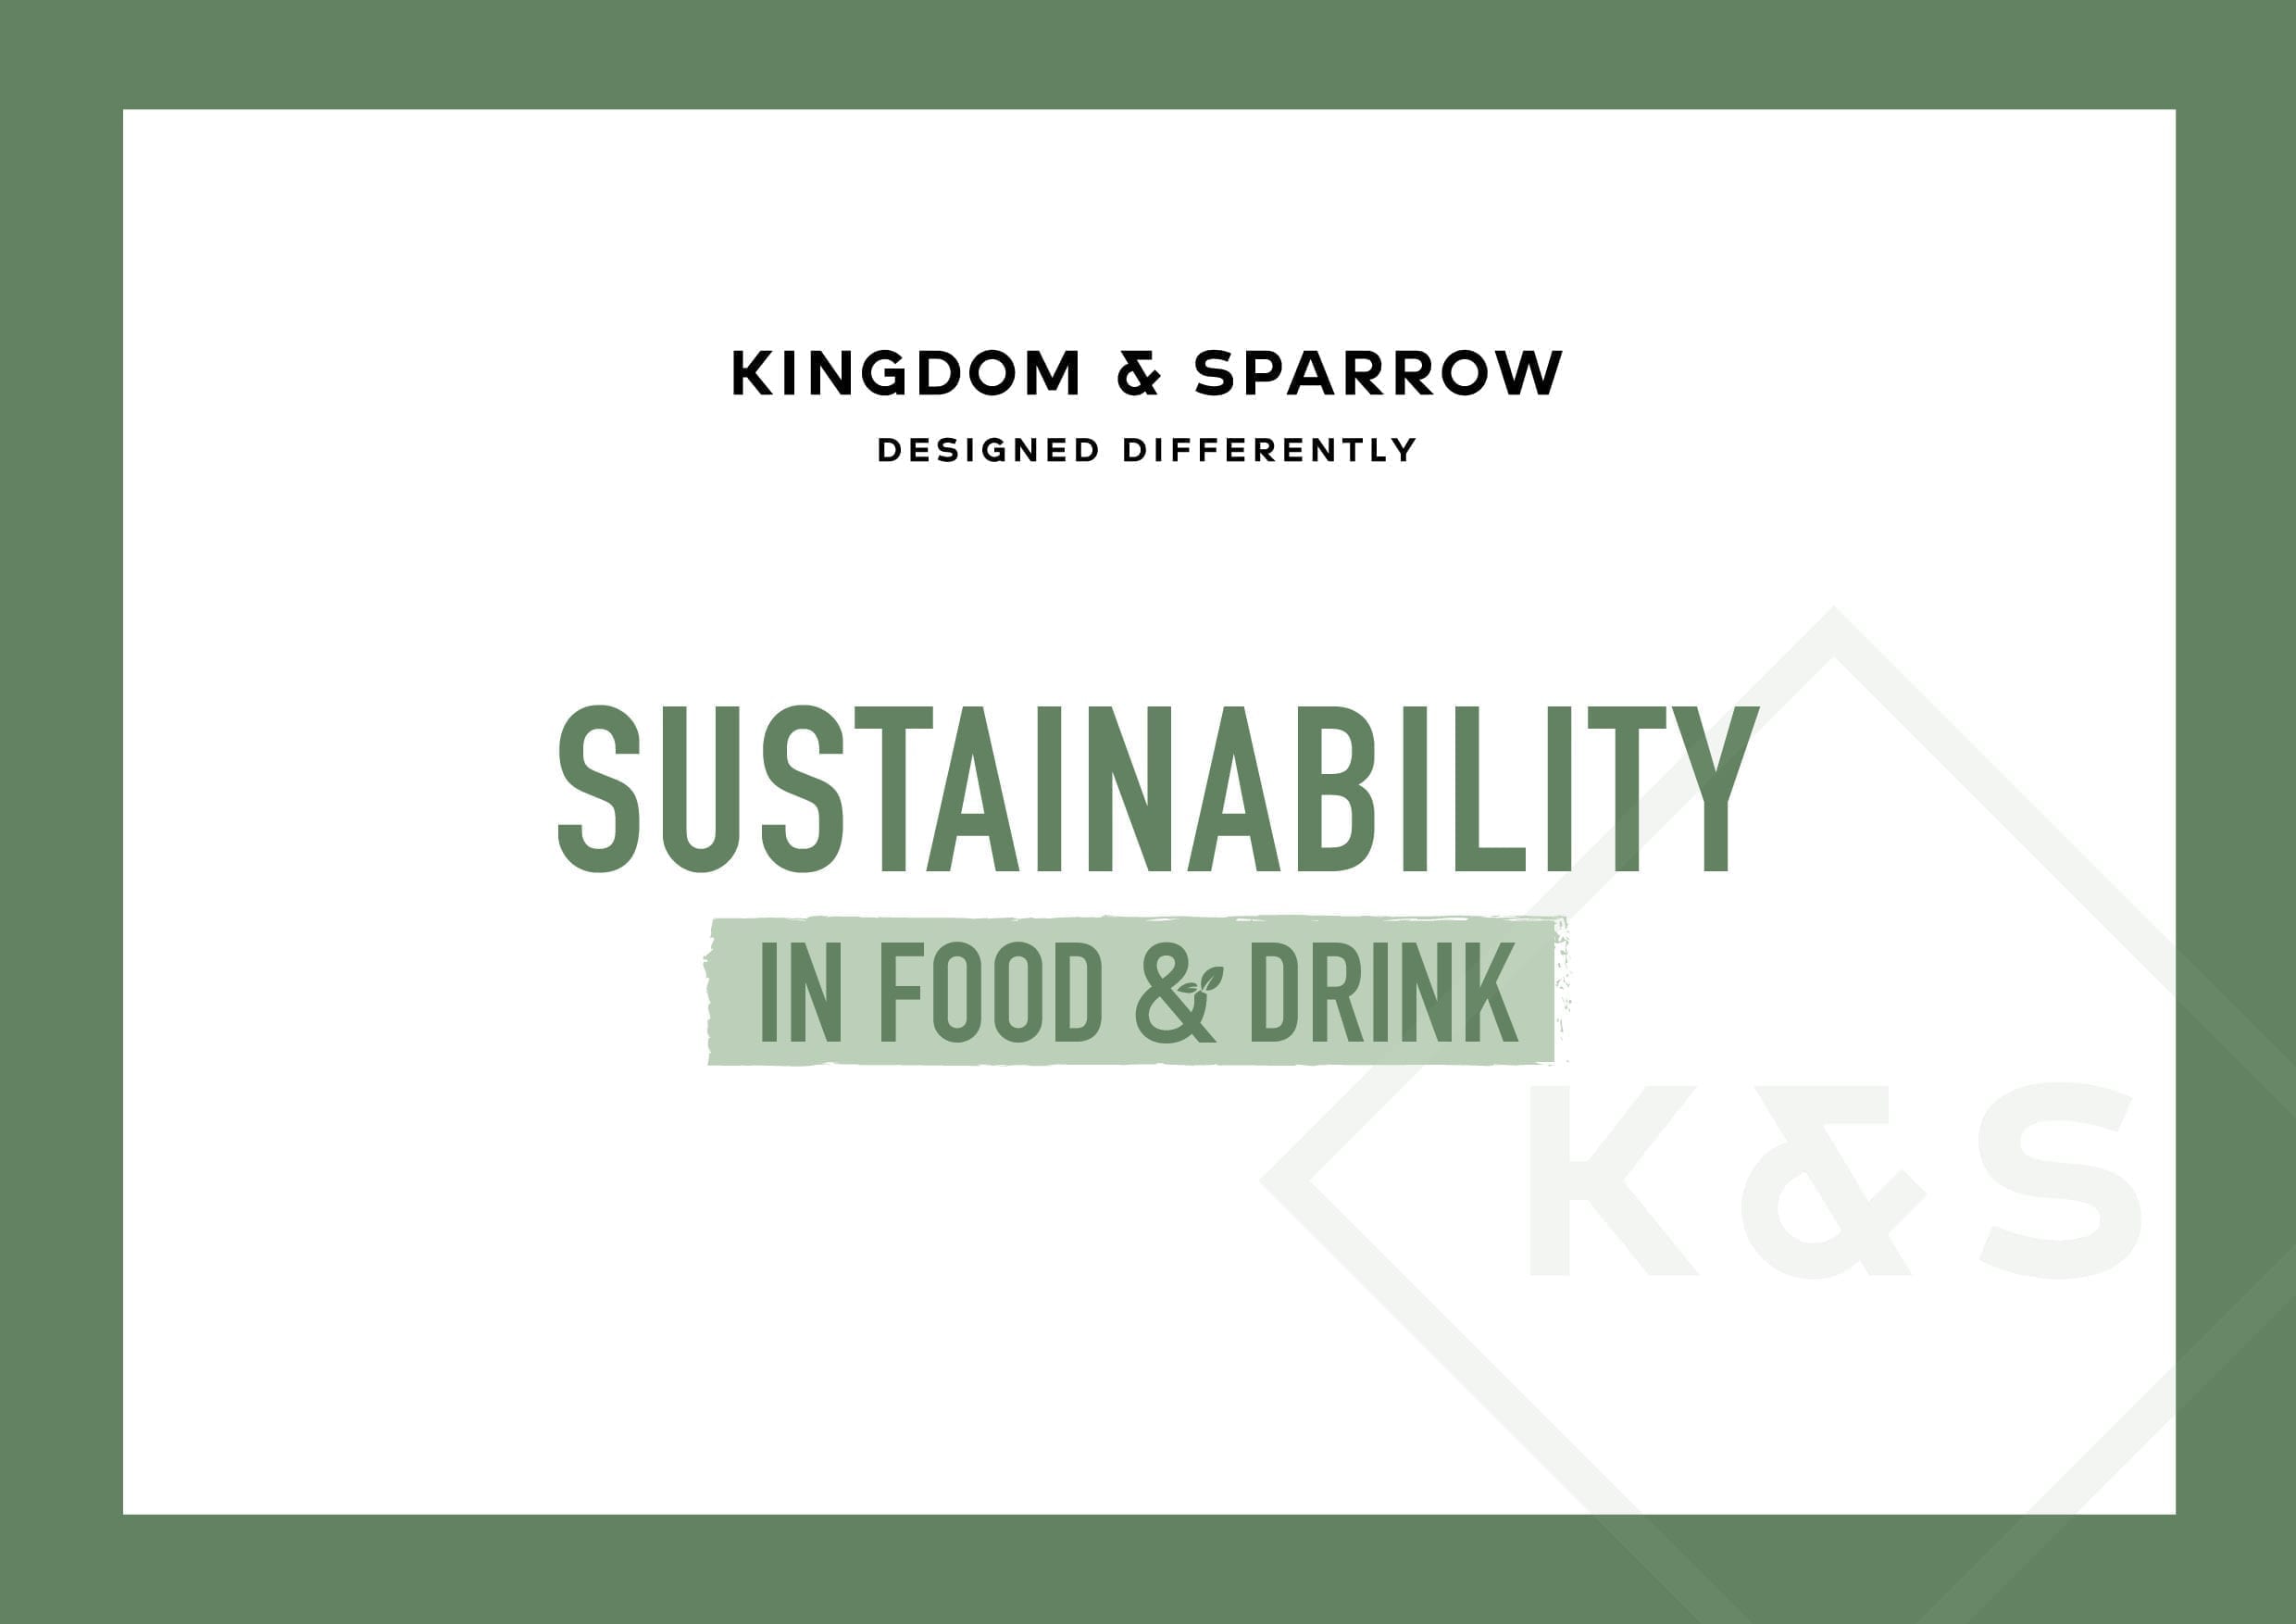 Sustainability in the food & drink industry